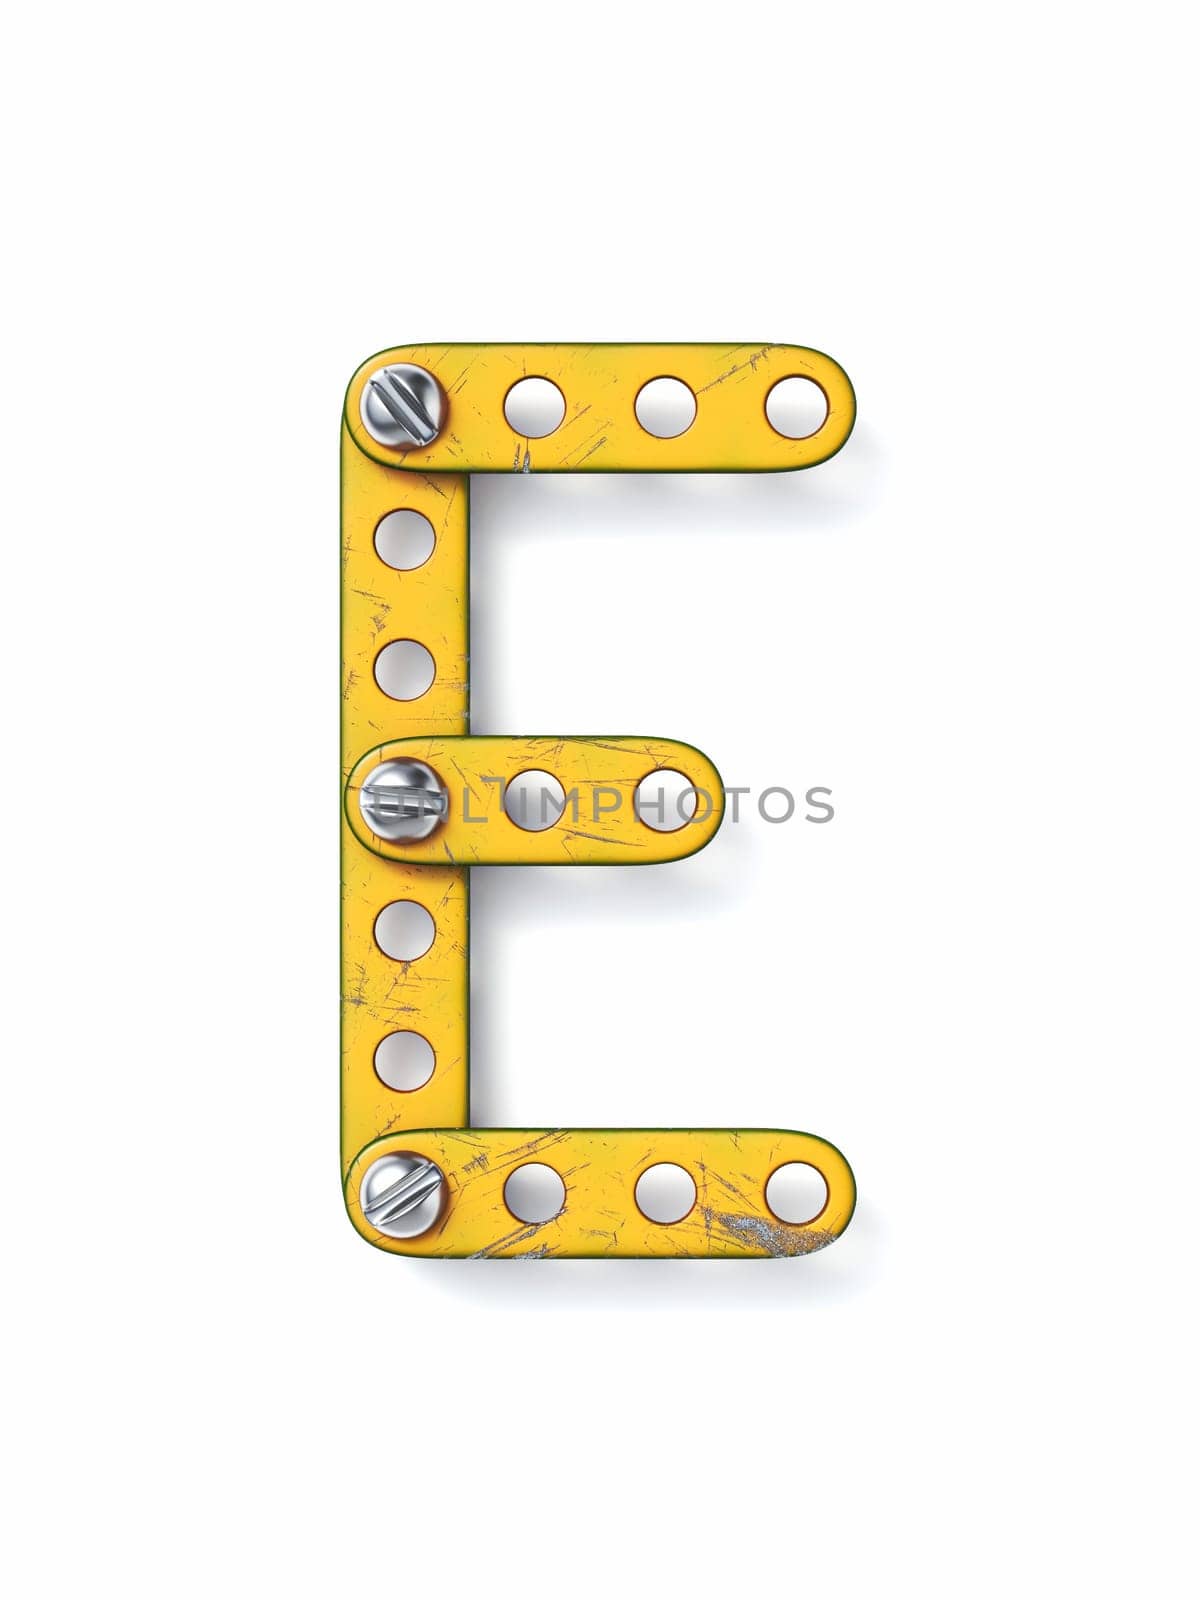 Aged yellow constructor font Letter E 3D rendering illustration isolated on white background